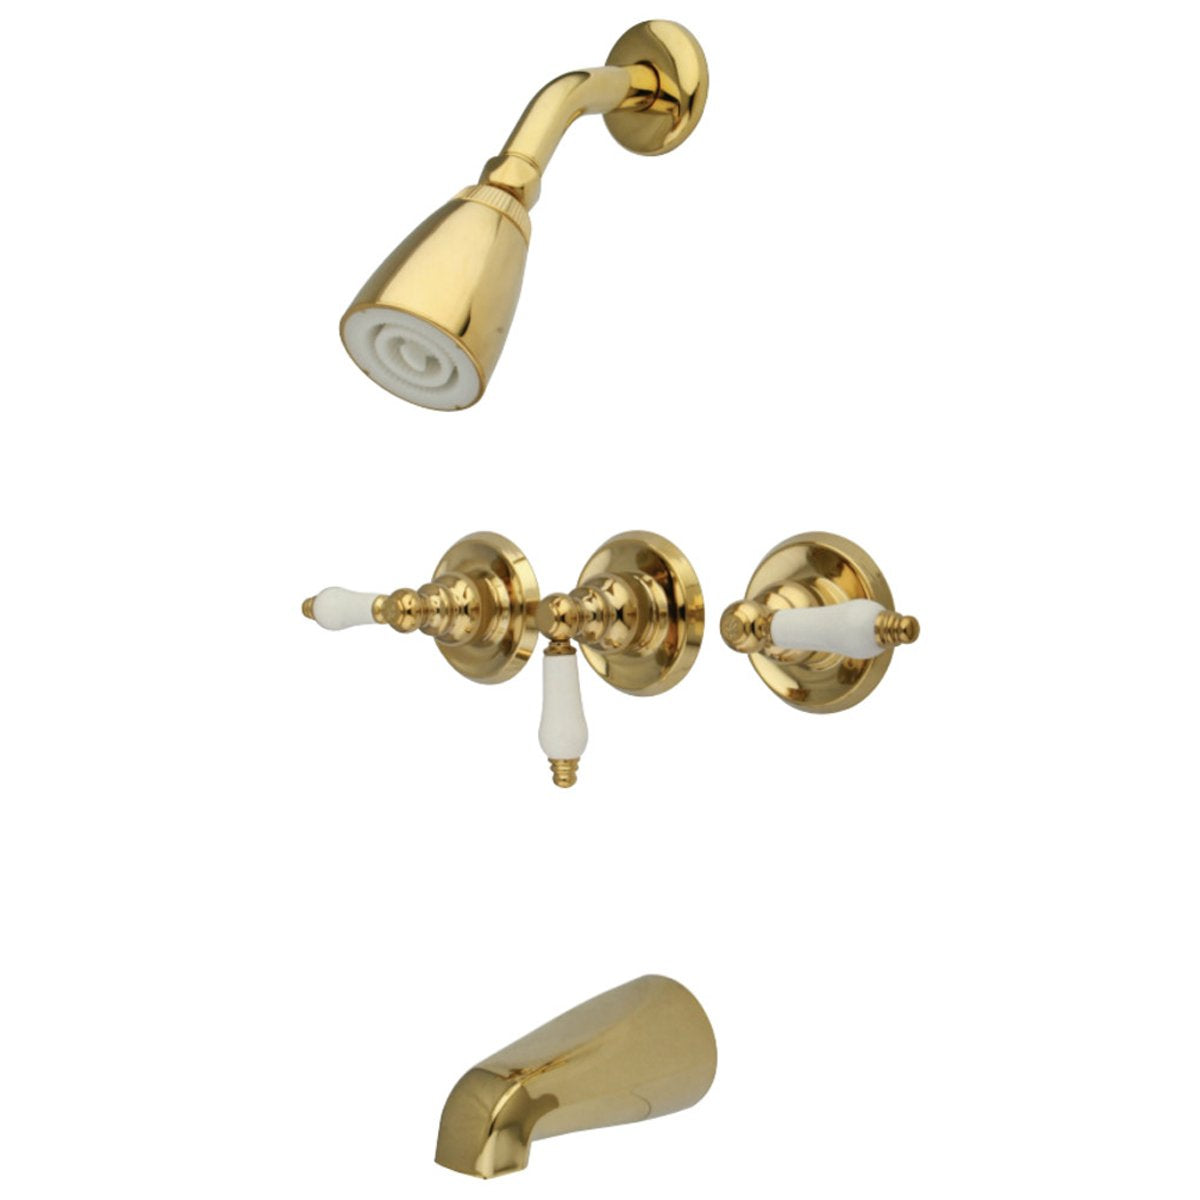 Kingston Brass 3-Lever Handles Tub and Shower Faucet